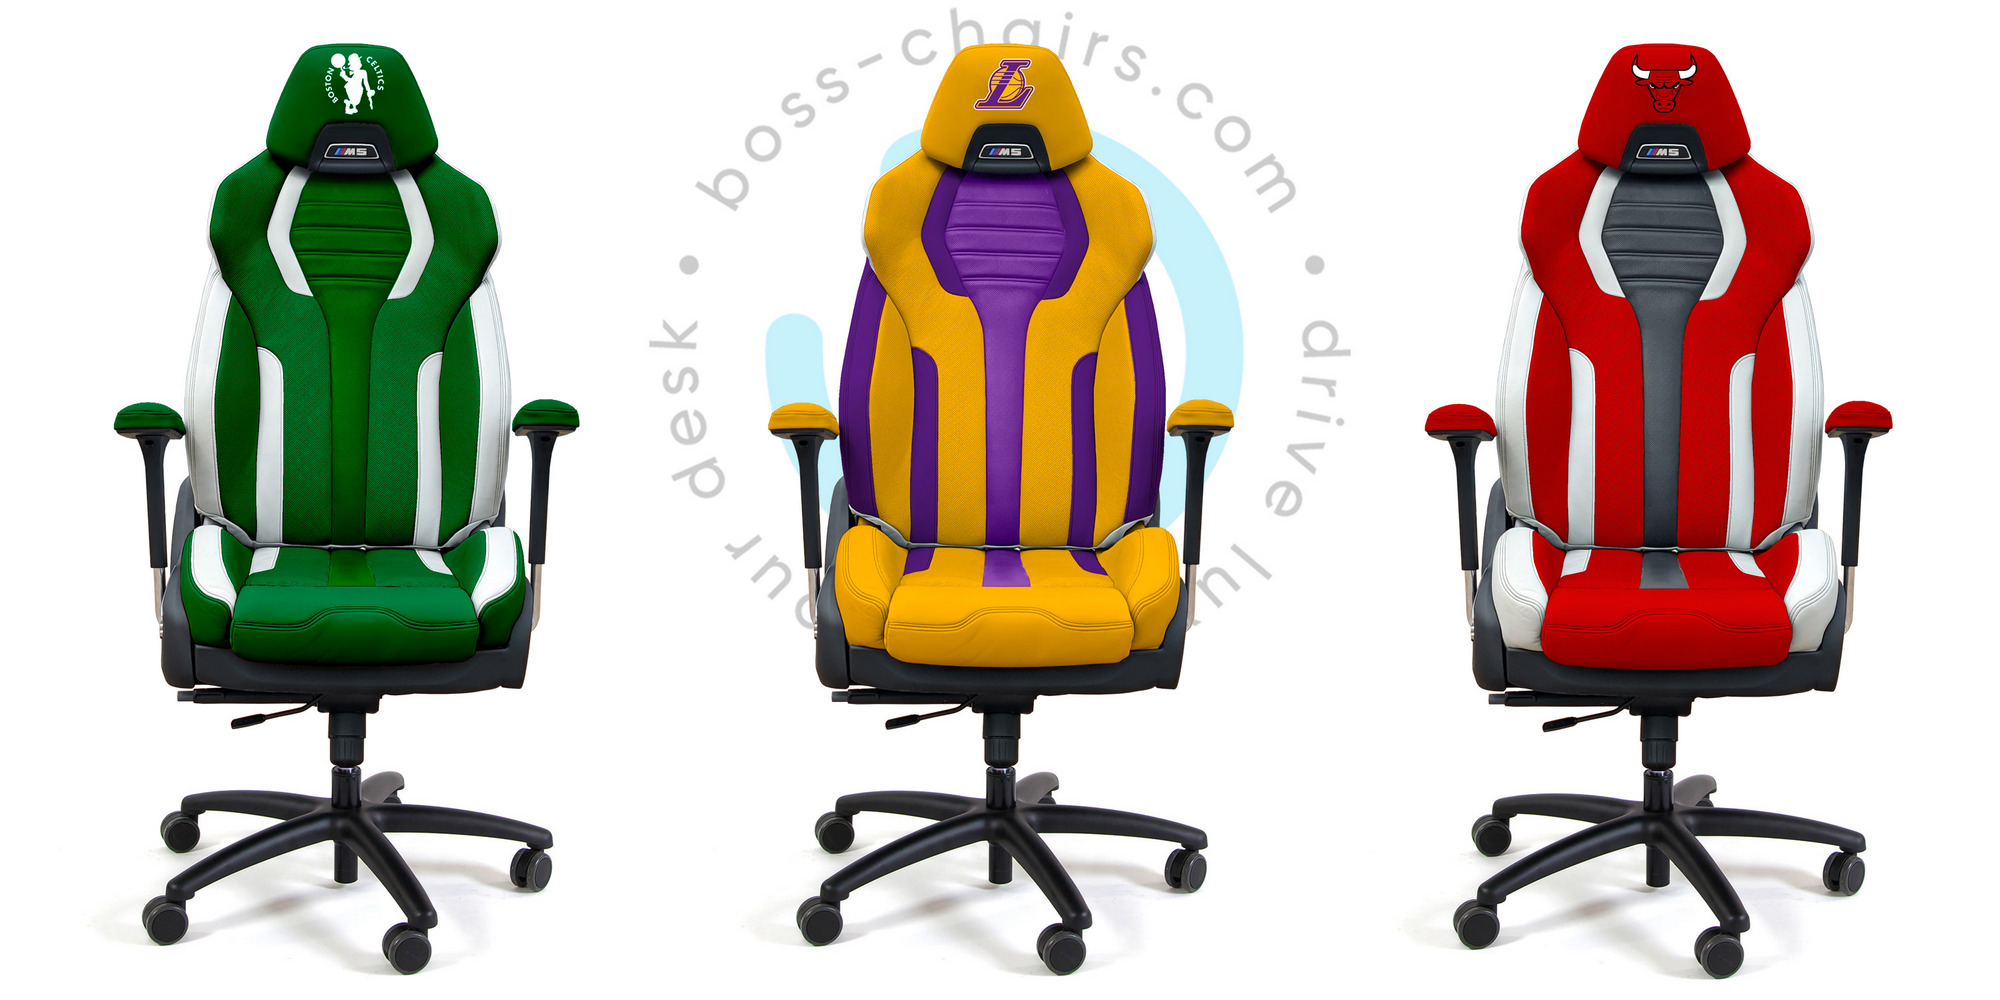 Boss- chairs (GTchairs) - Creative office chairs in the style of basketball teams